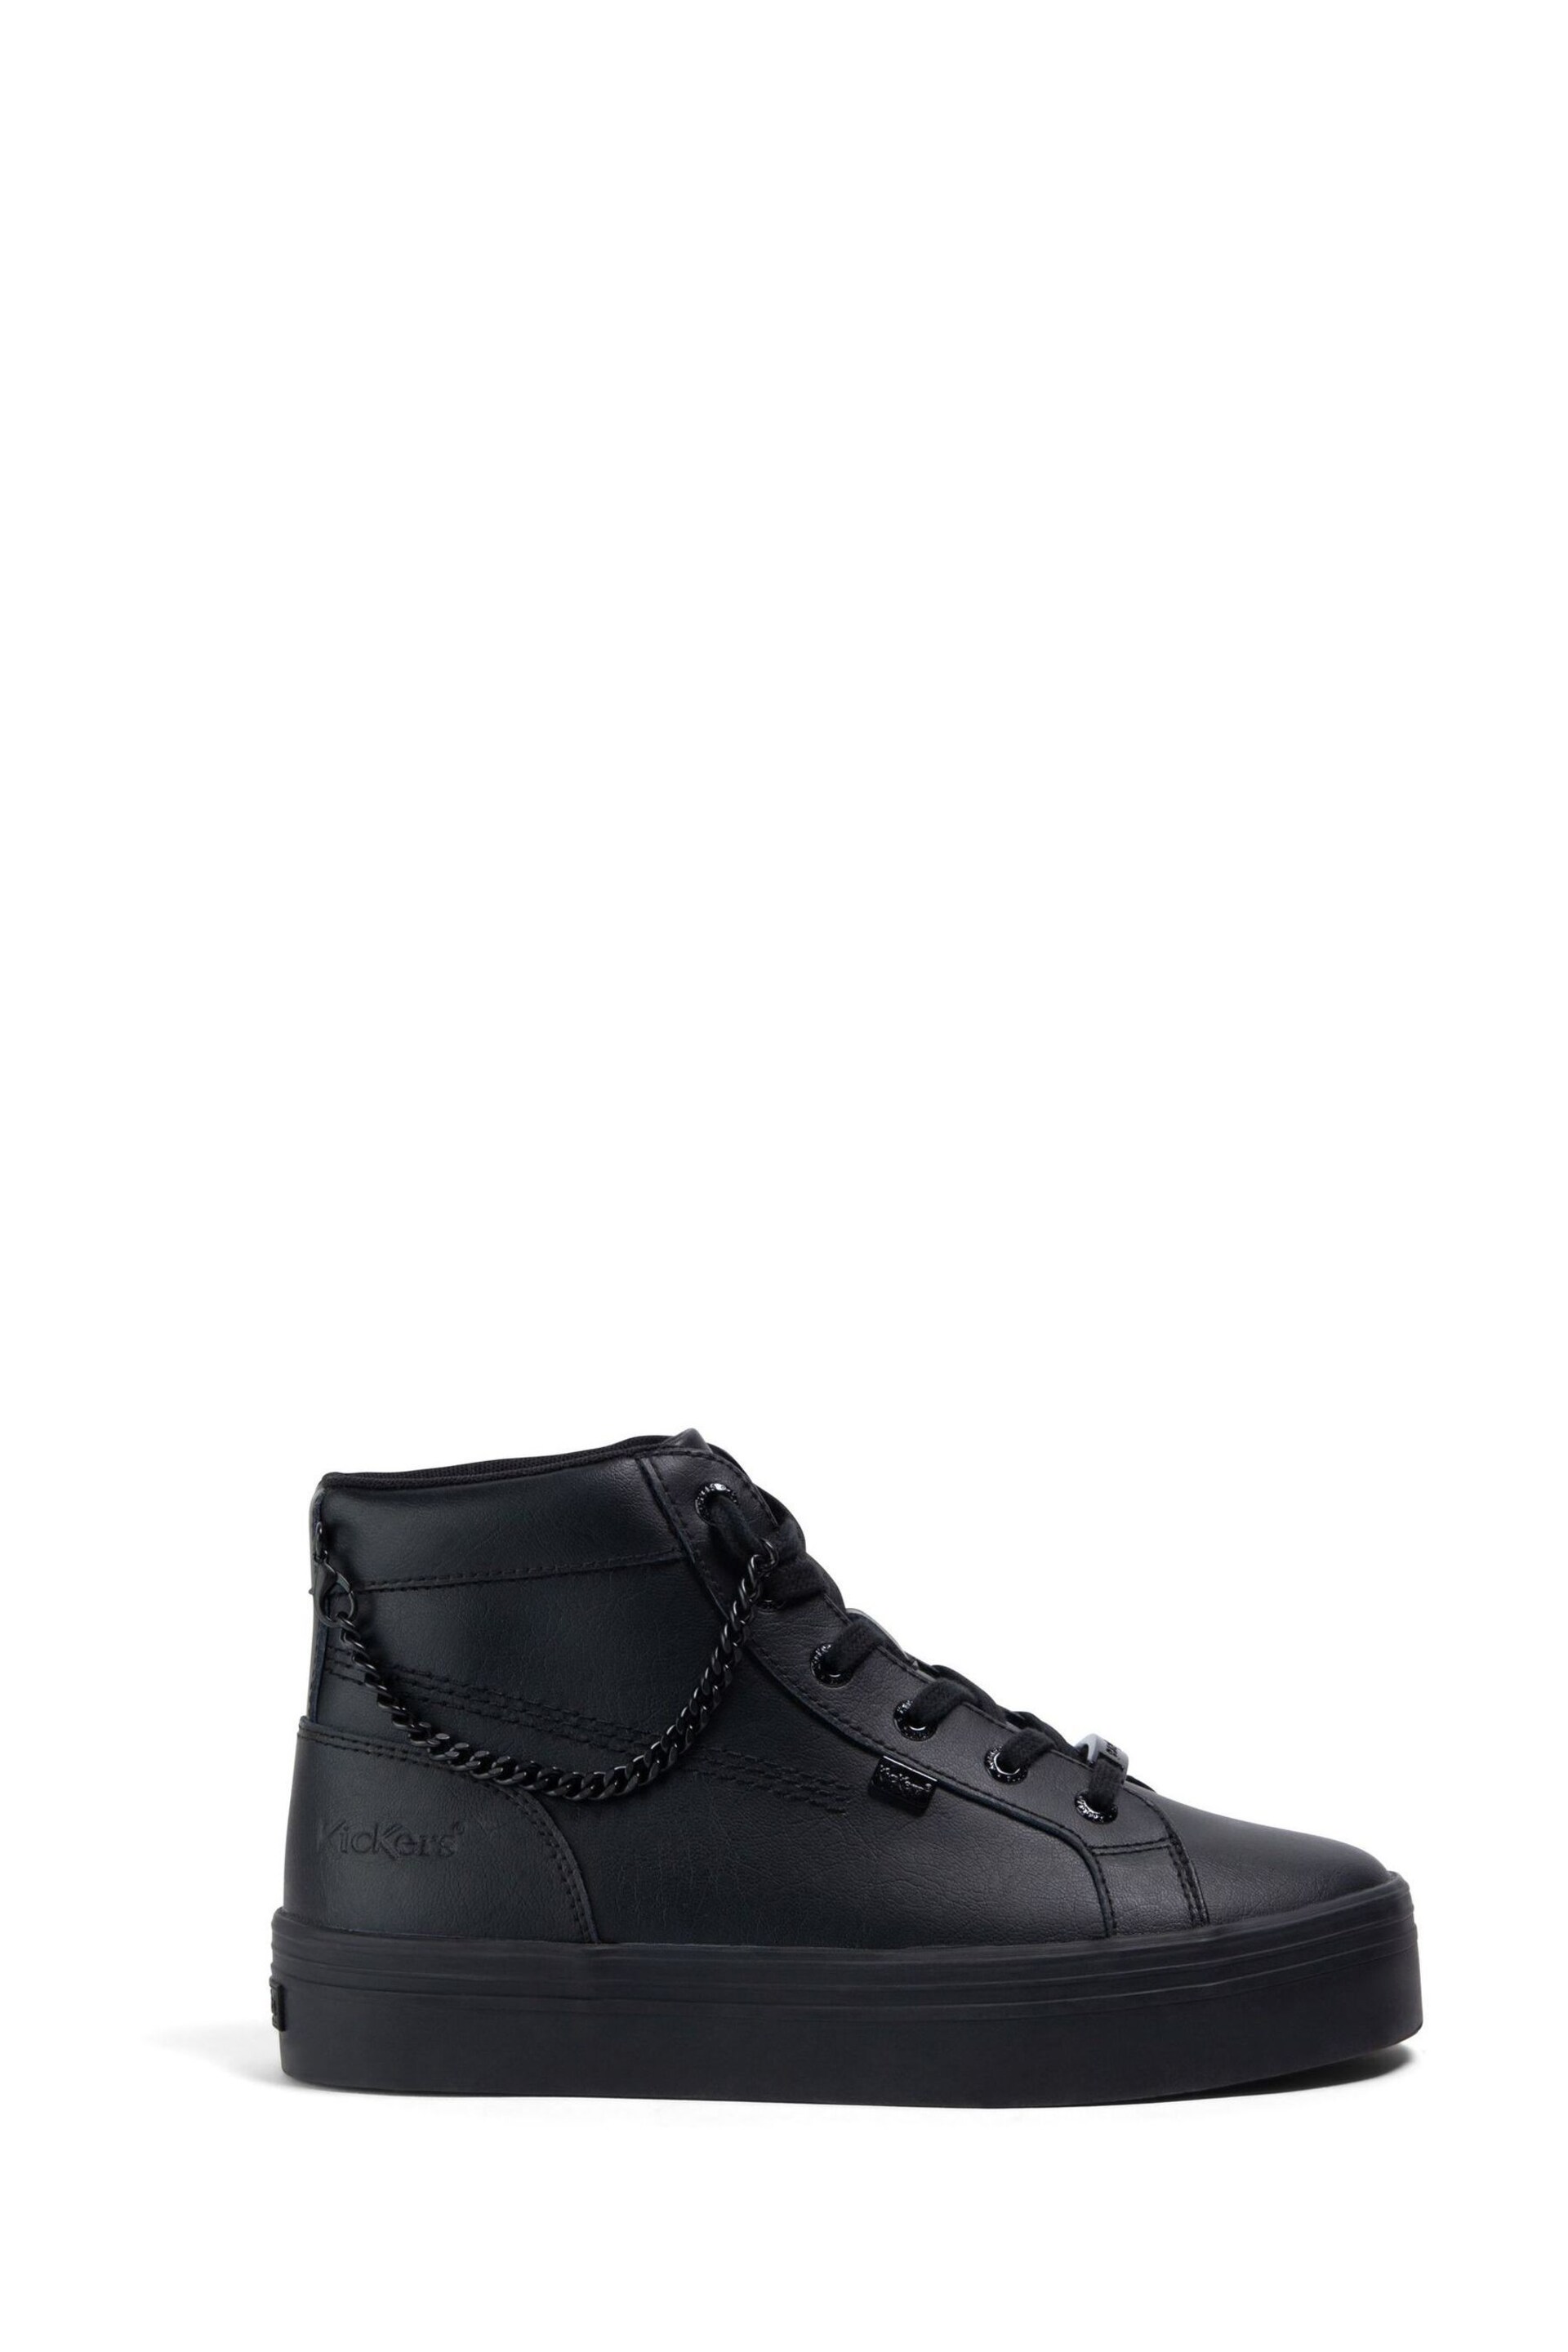 Kickers Black Youth Tovni Hi Stack Chain Leather Trainers - Image 1 of 6